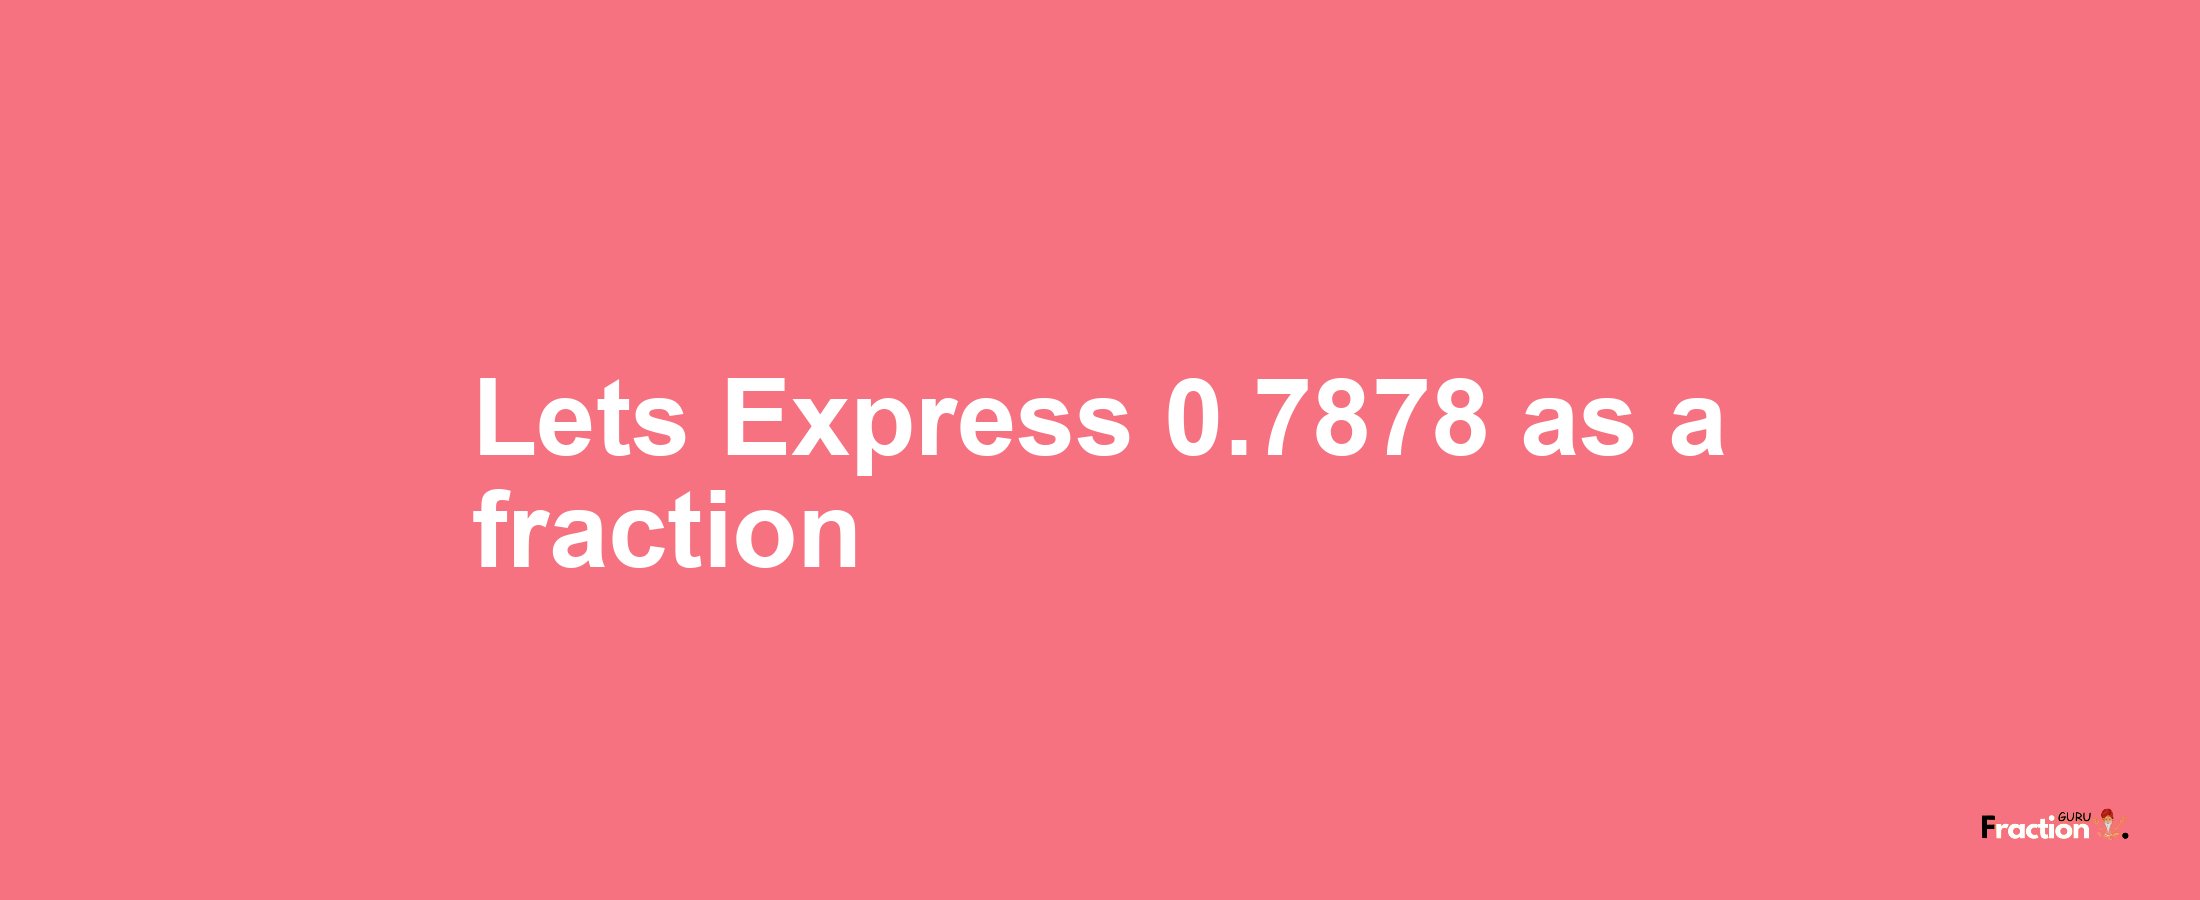 Lets Express 0.7878 as afraction